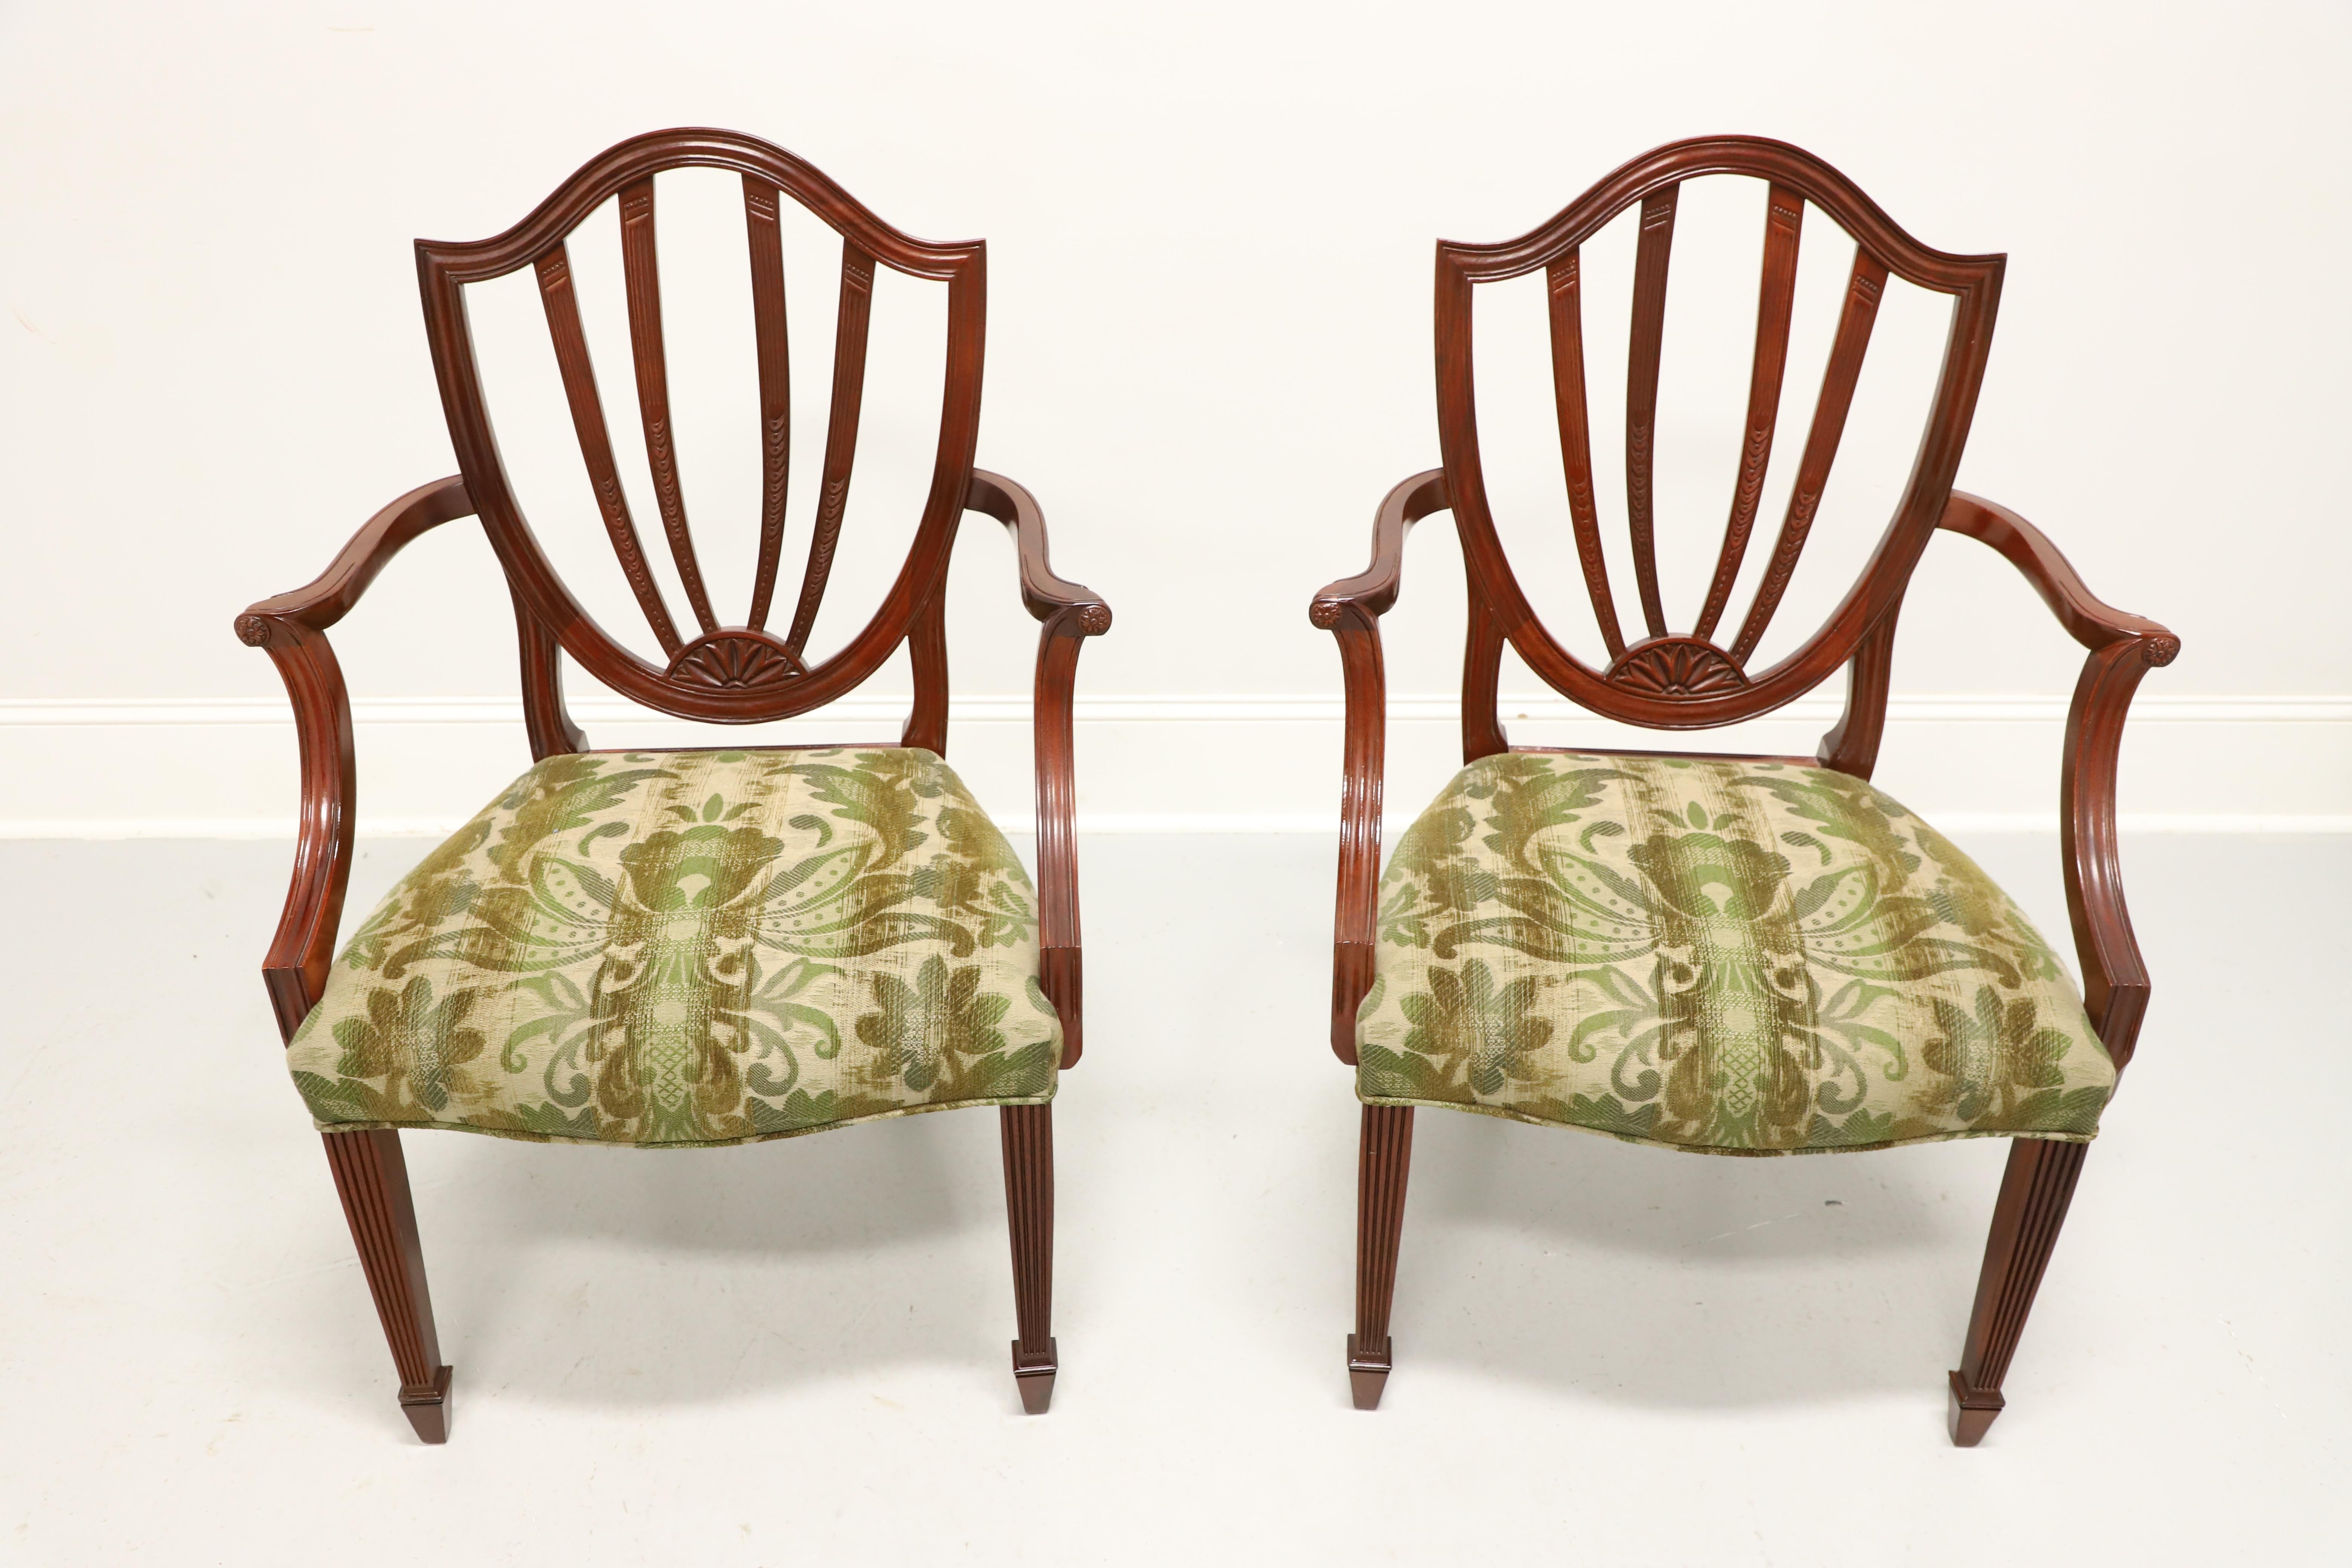 A pair of dining armchairs in the Georgian Hepplewhite style by Baker Furniture, from their Historic Charleston Reproductions Collection. Solid mahogany with carved shield backs, gently curved arms with fluted carved supports, green & beige color